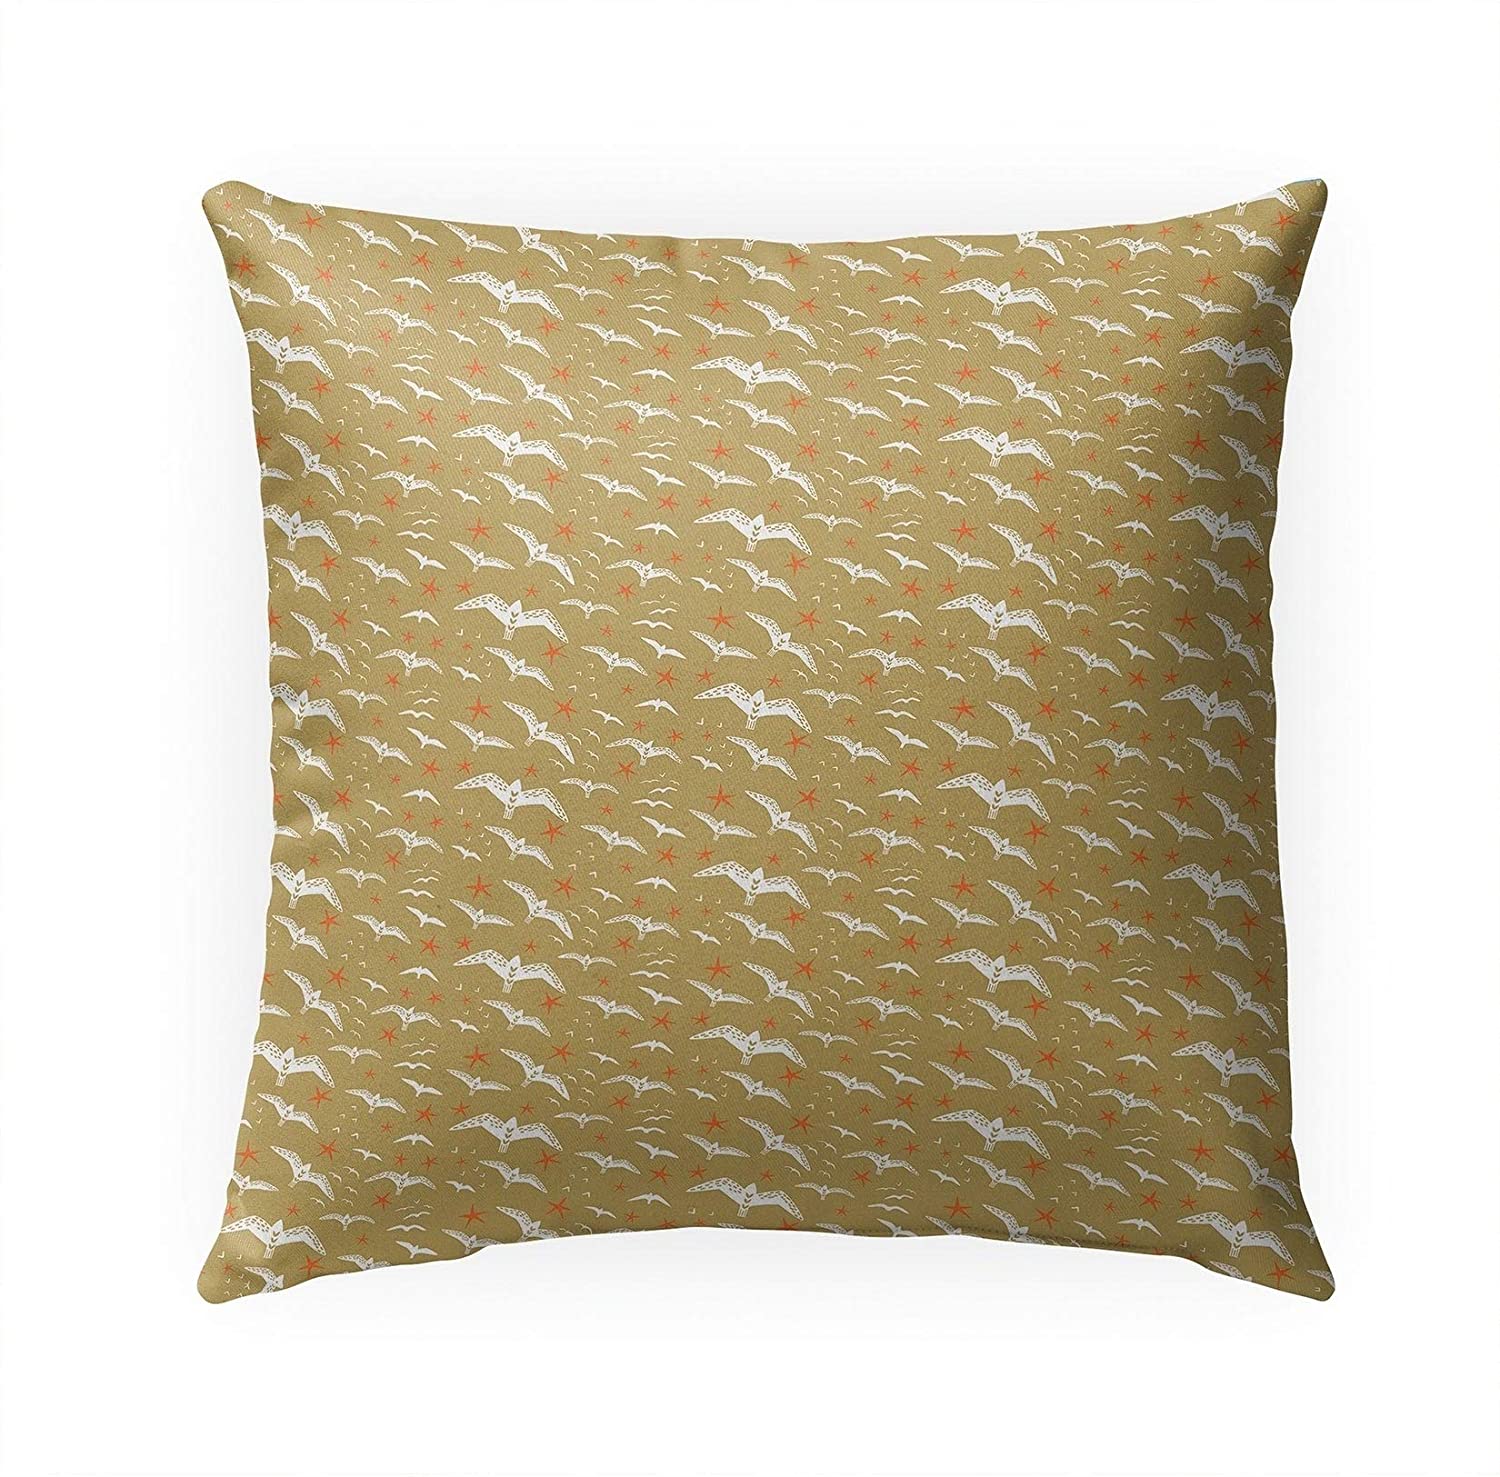 MISC Sea Birds Indoor|Outdoor Pillow by Chi Hey Lee 18x18 Tan Geometric Nautical Coastal Polyester Removable Cover